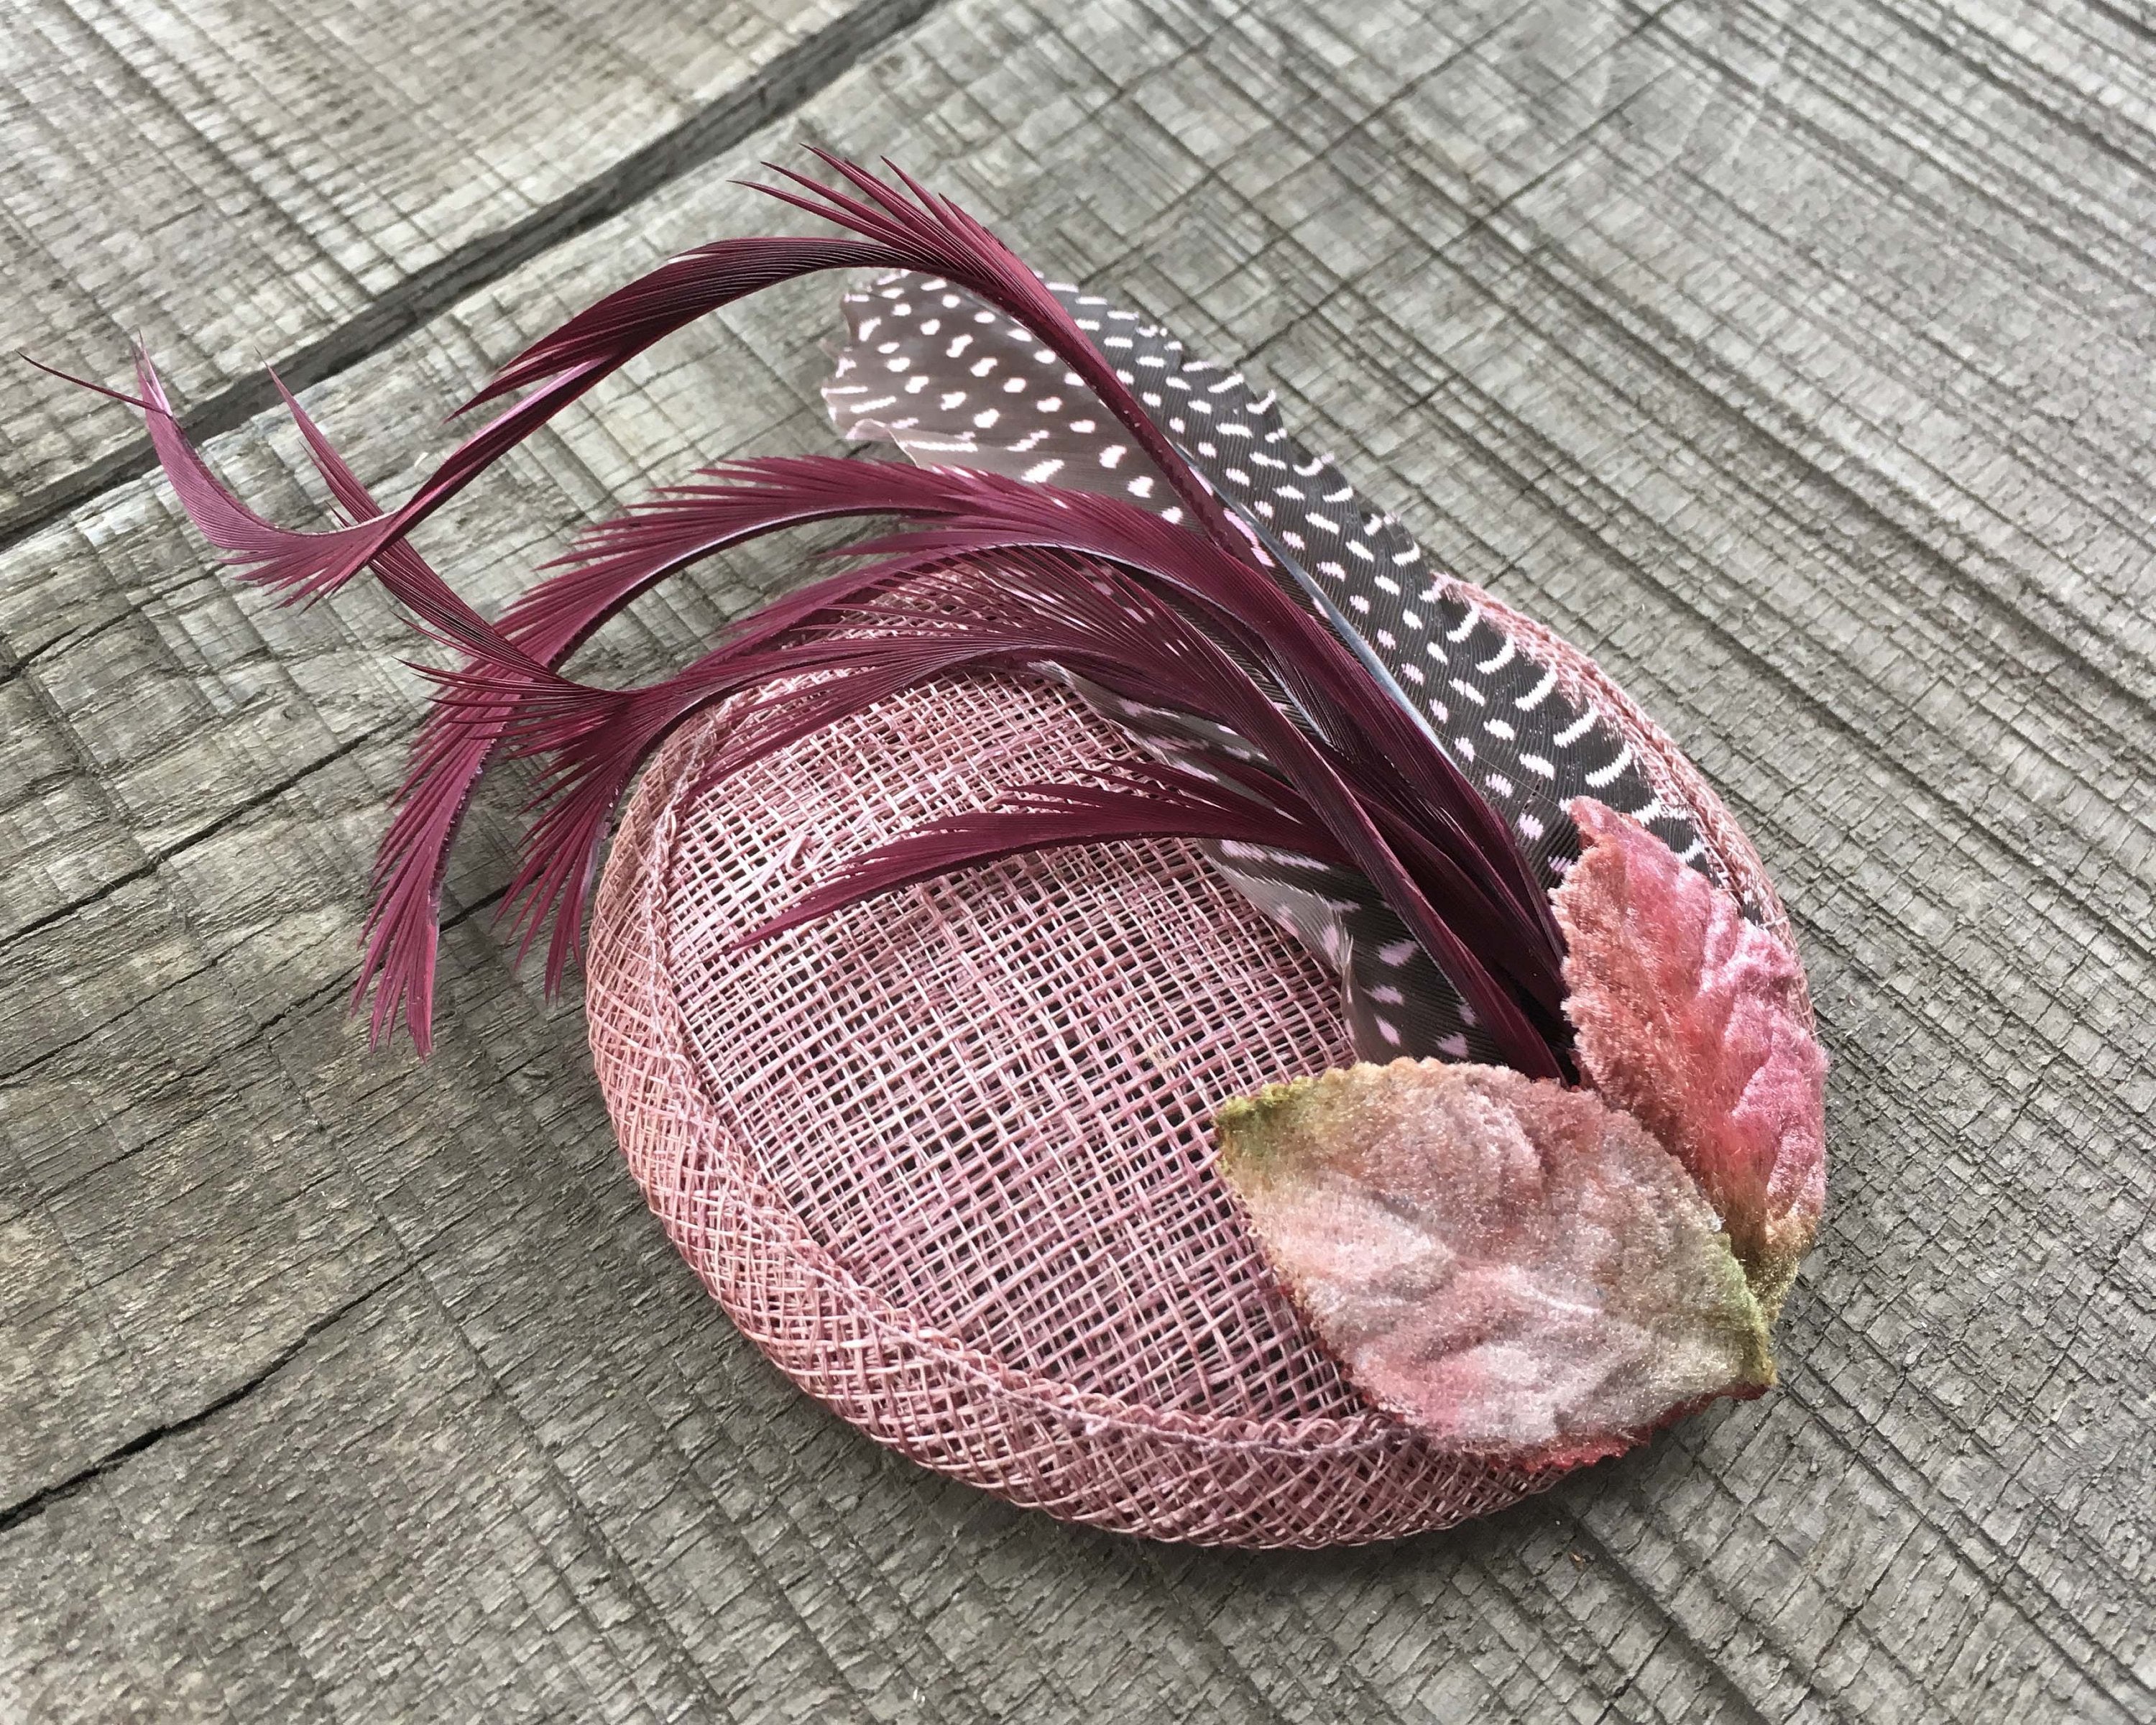 FASCINATOR - WITH VINTAGE VELVET LEAFS AND FEATHERS IN DUSTY PINK AND DARK RED © Seegang Berlin